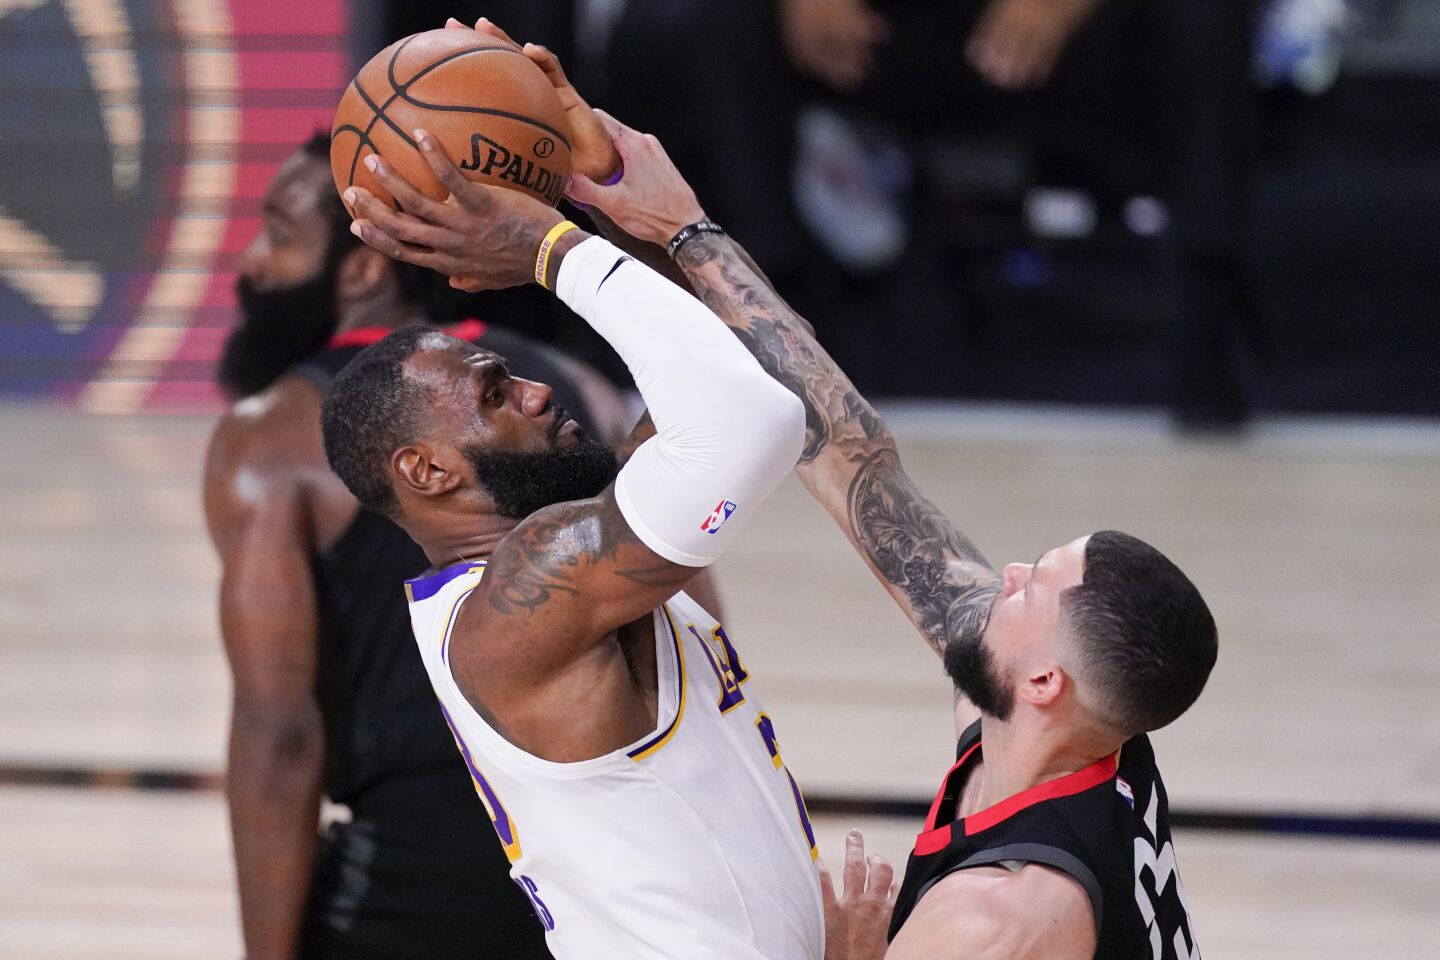 The Lakers' LeBron James goes up for a second-half shot as the Rockets' Austin Rivers defends Saturday.